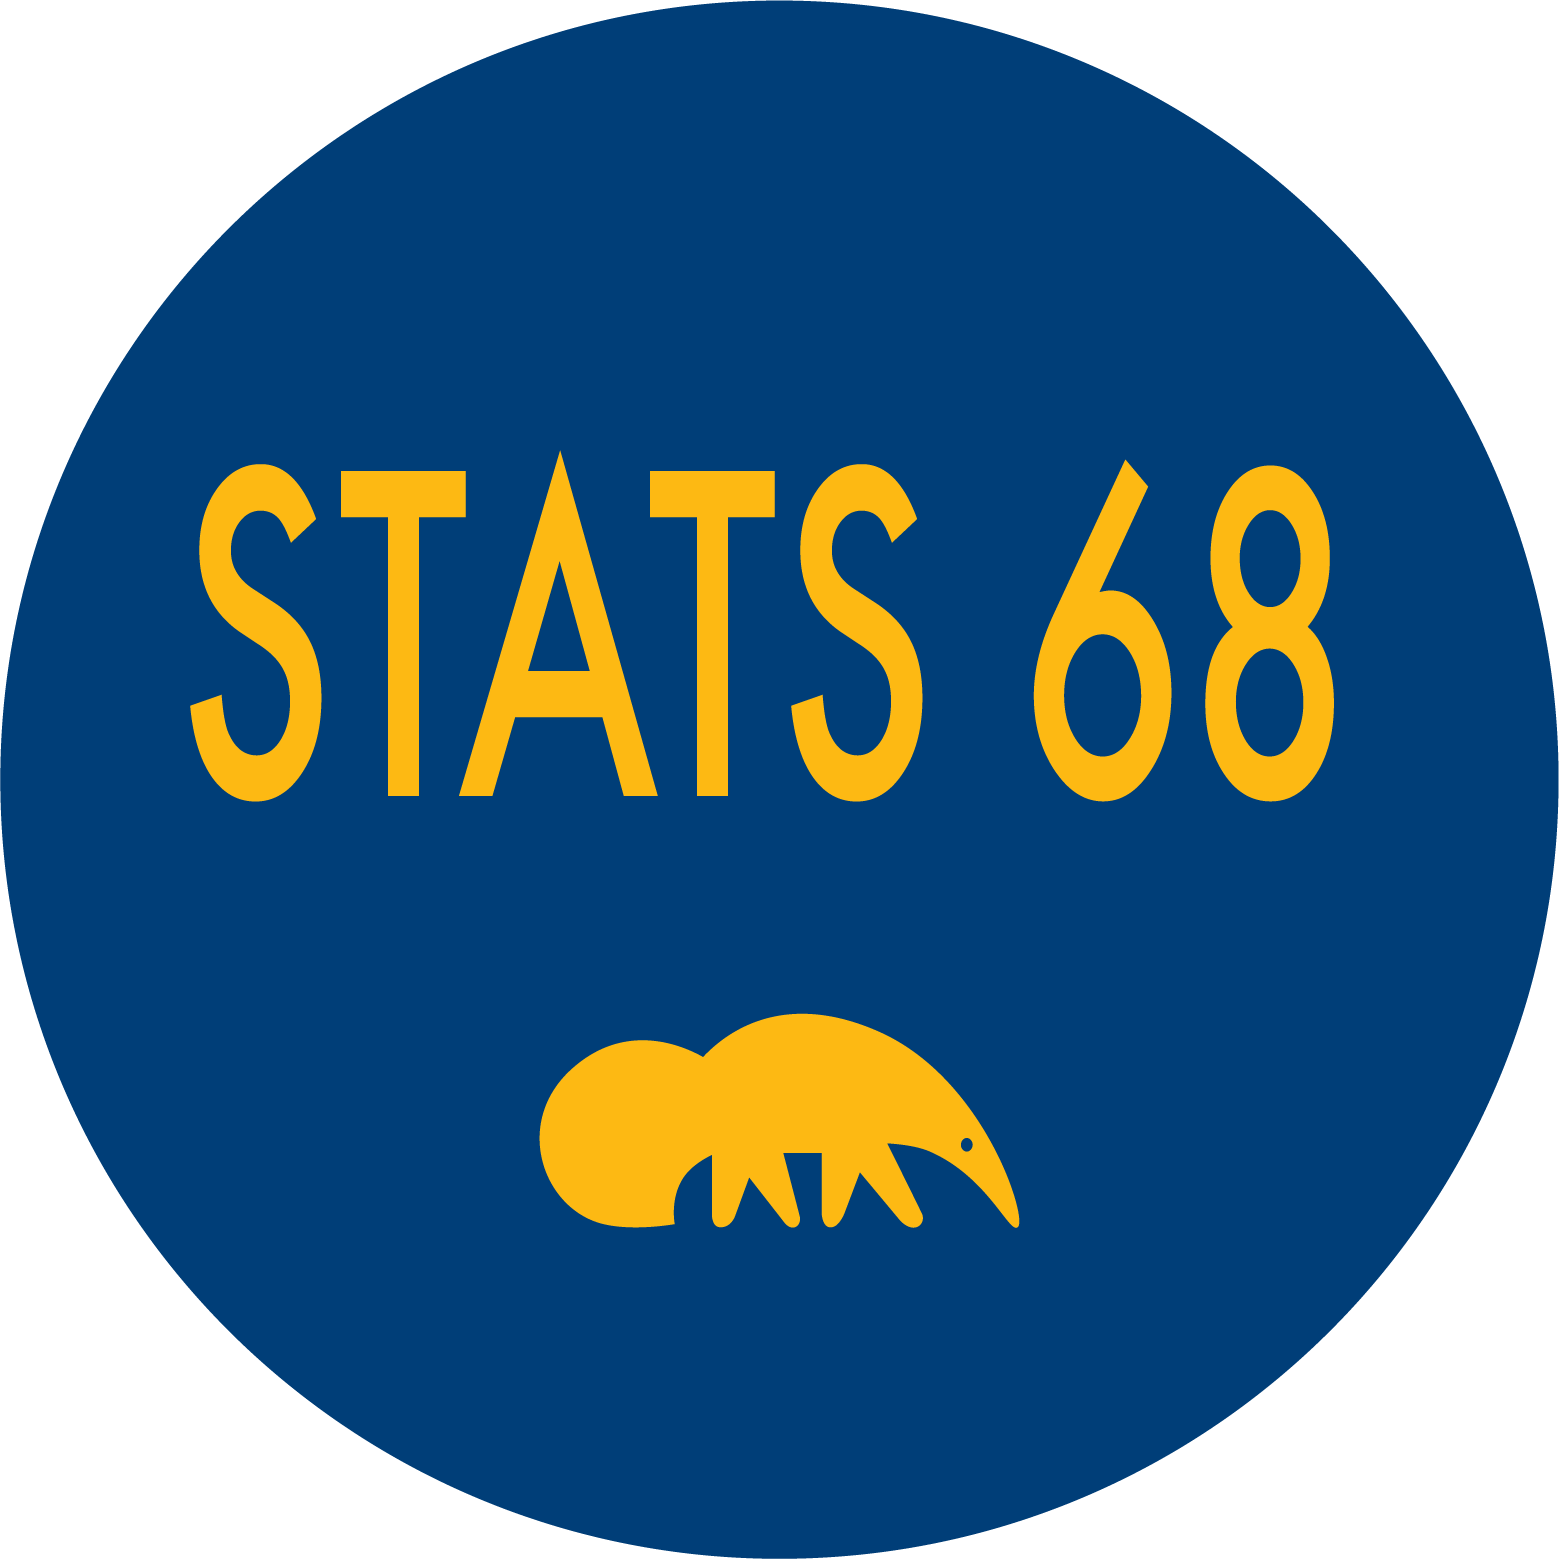 stats 68 logo that reads Stats 68 and has an anteater icon